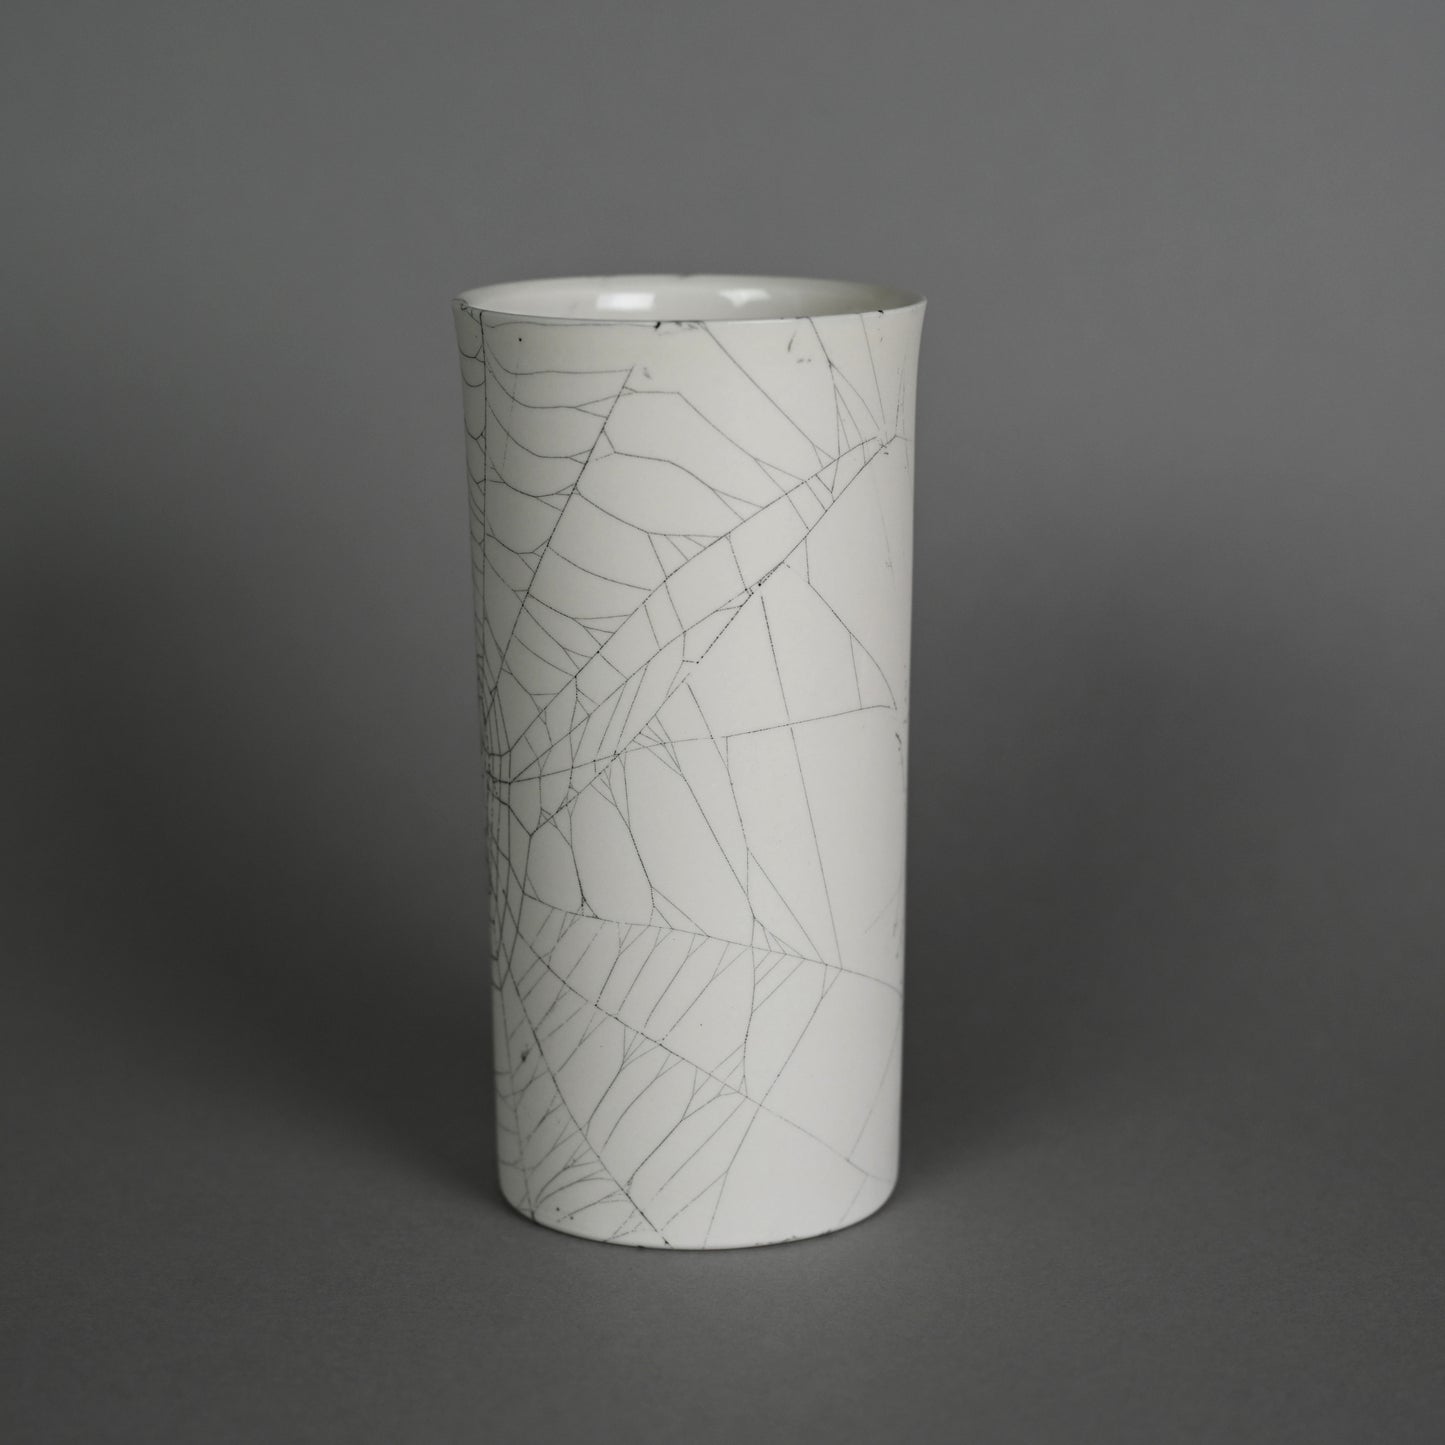 Web on Clay (185), Collected September 25, 2022